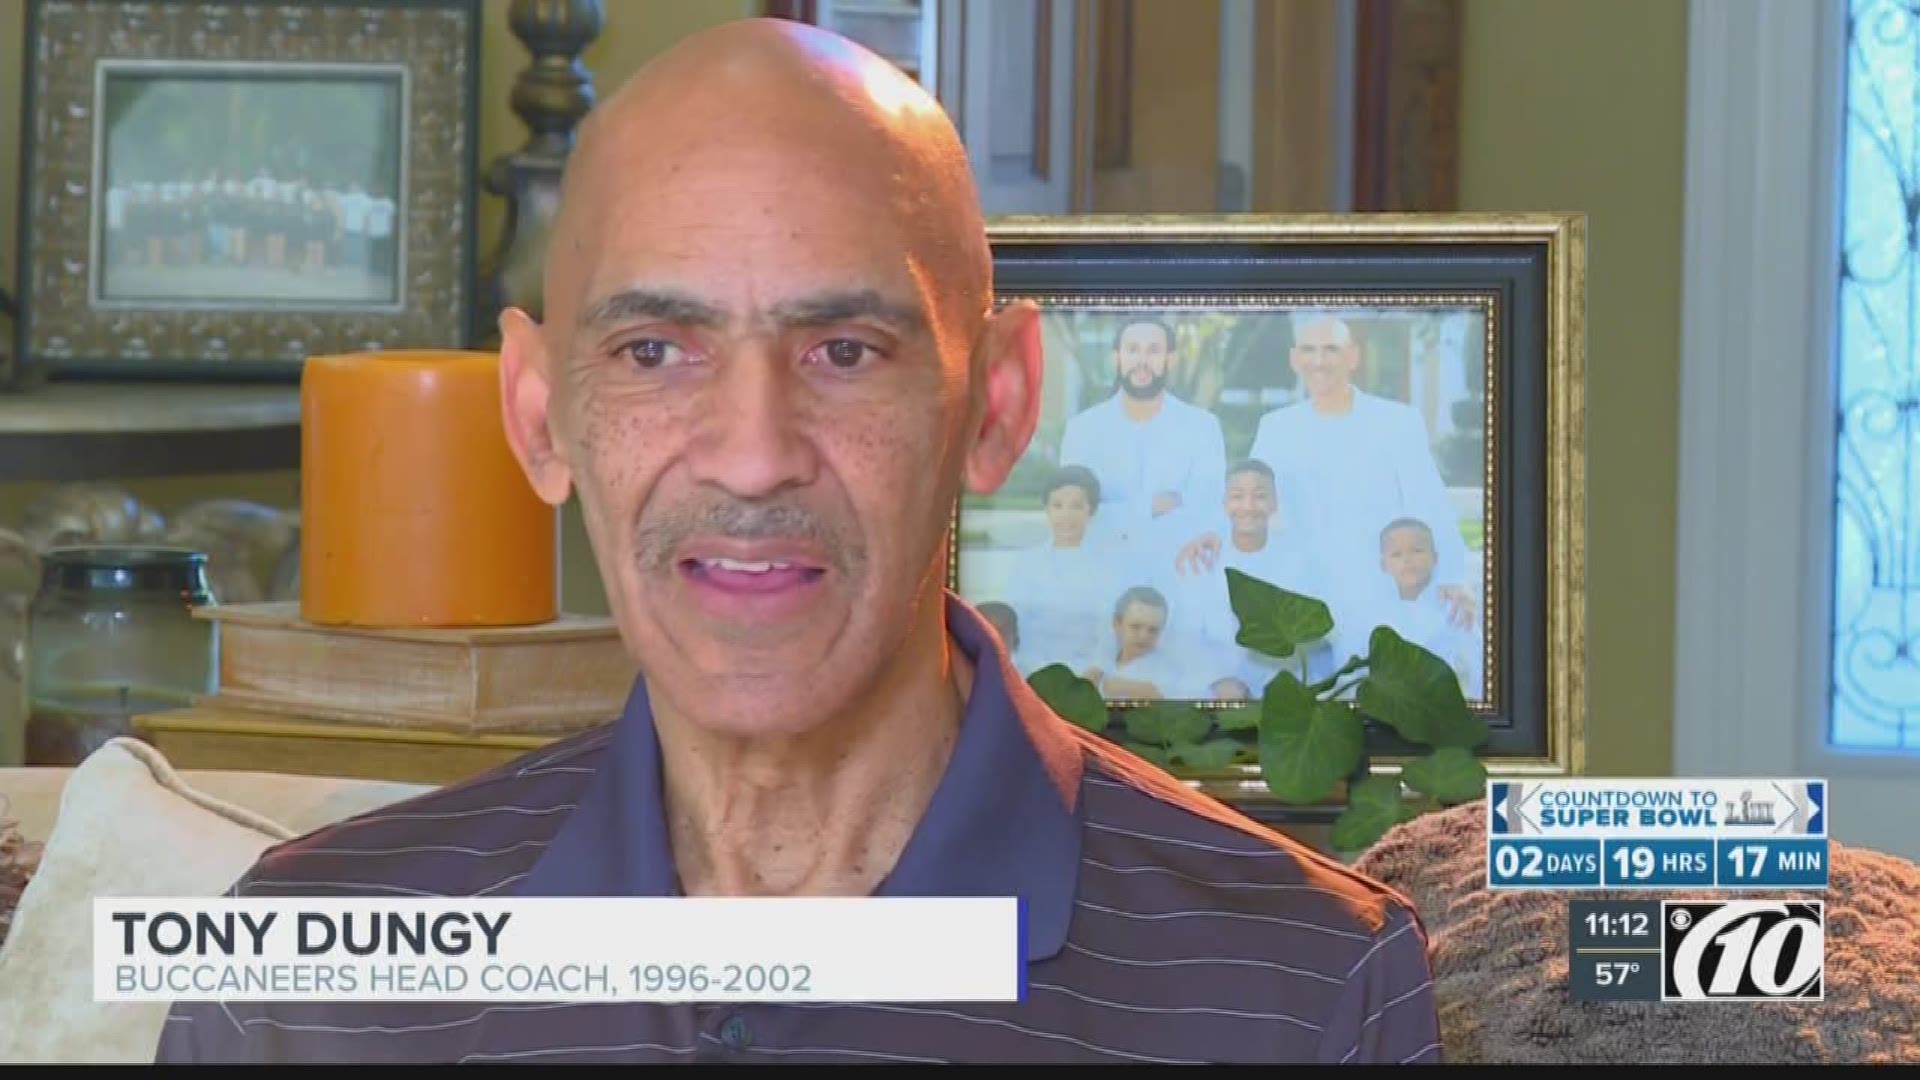 10News goes 1-on-1 with Tony Dungy on life, Super Bowl LIII, blown calls, Colin Kaepernick and the state of the Buccaneers.